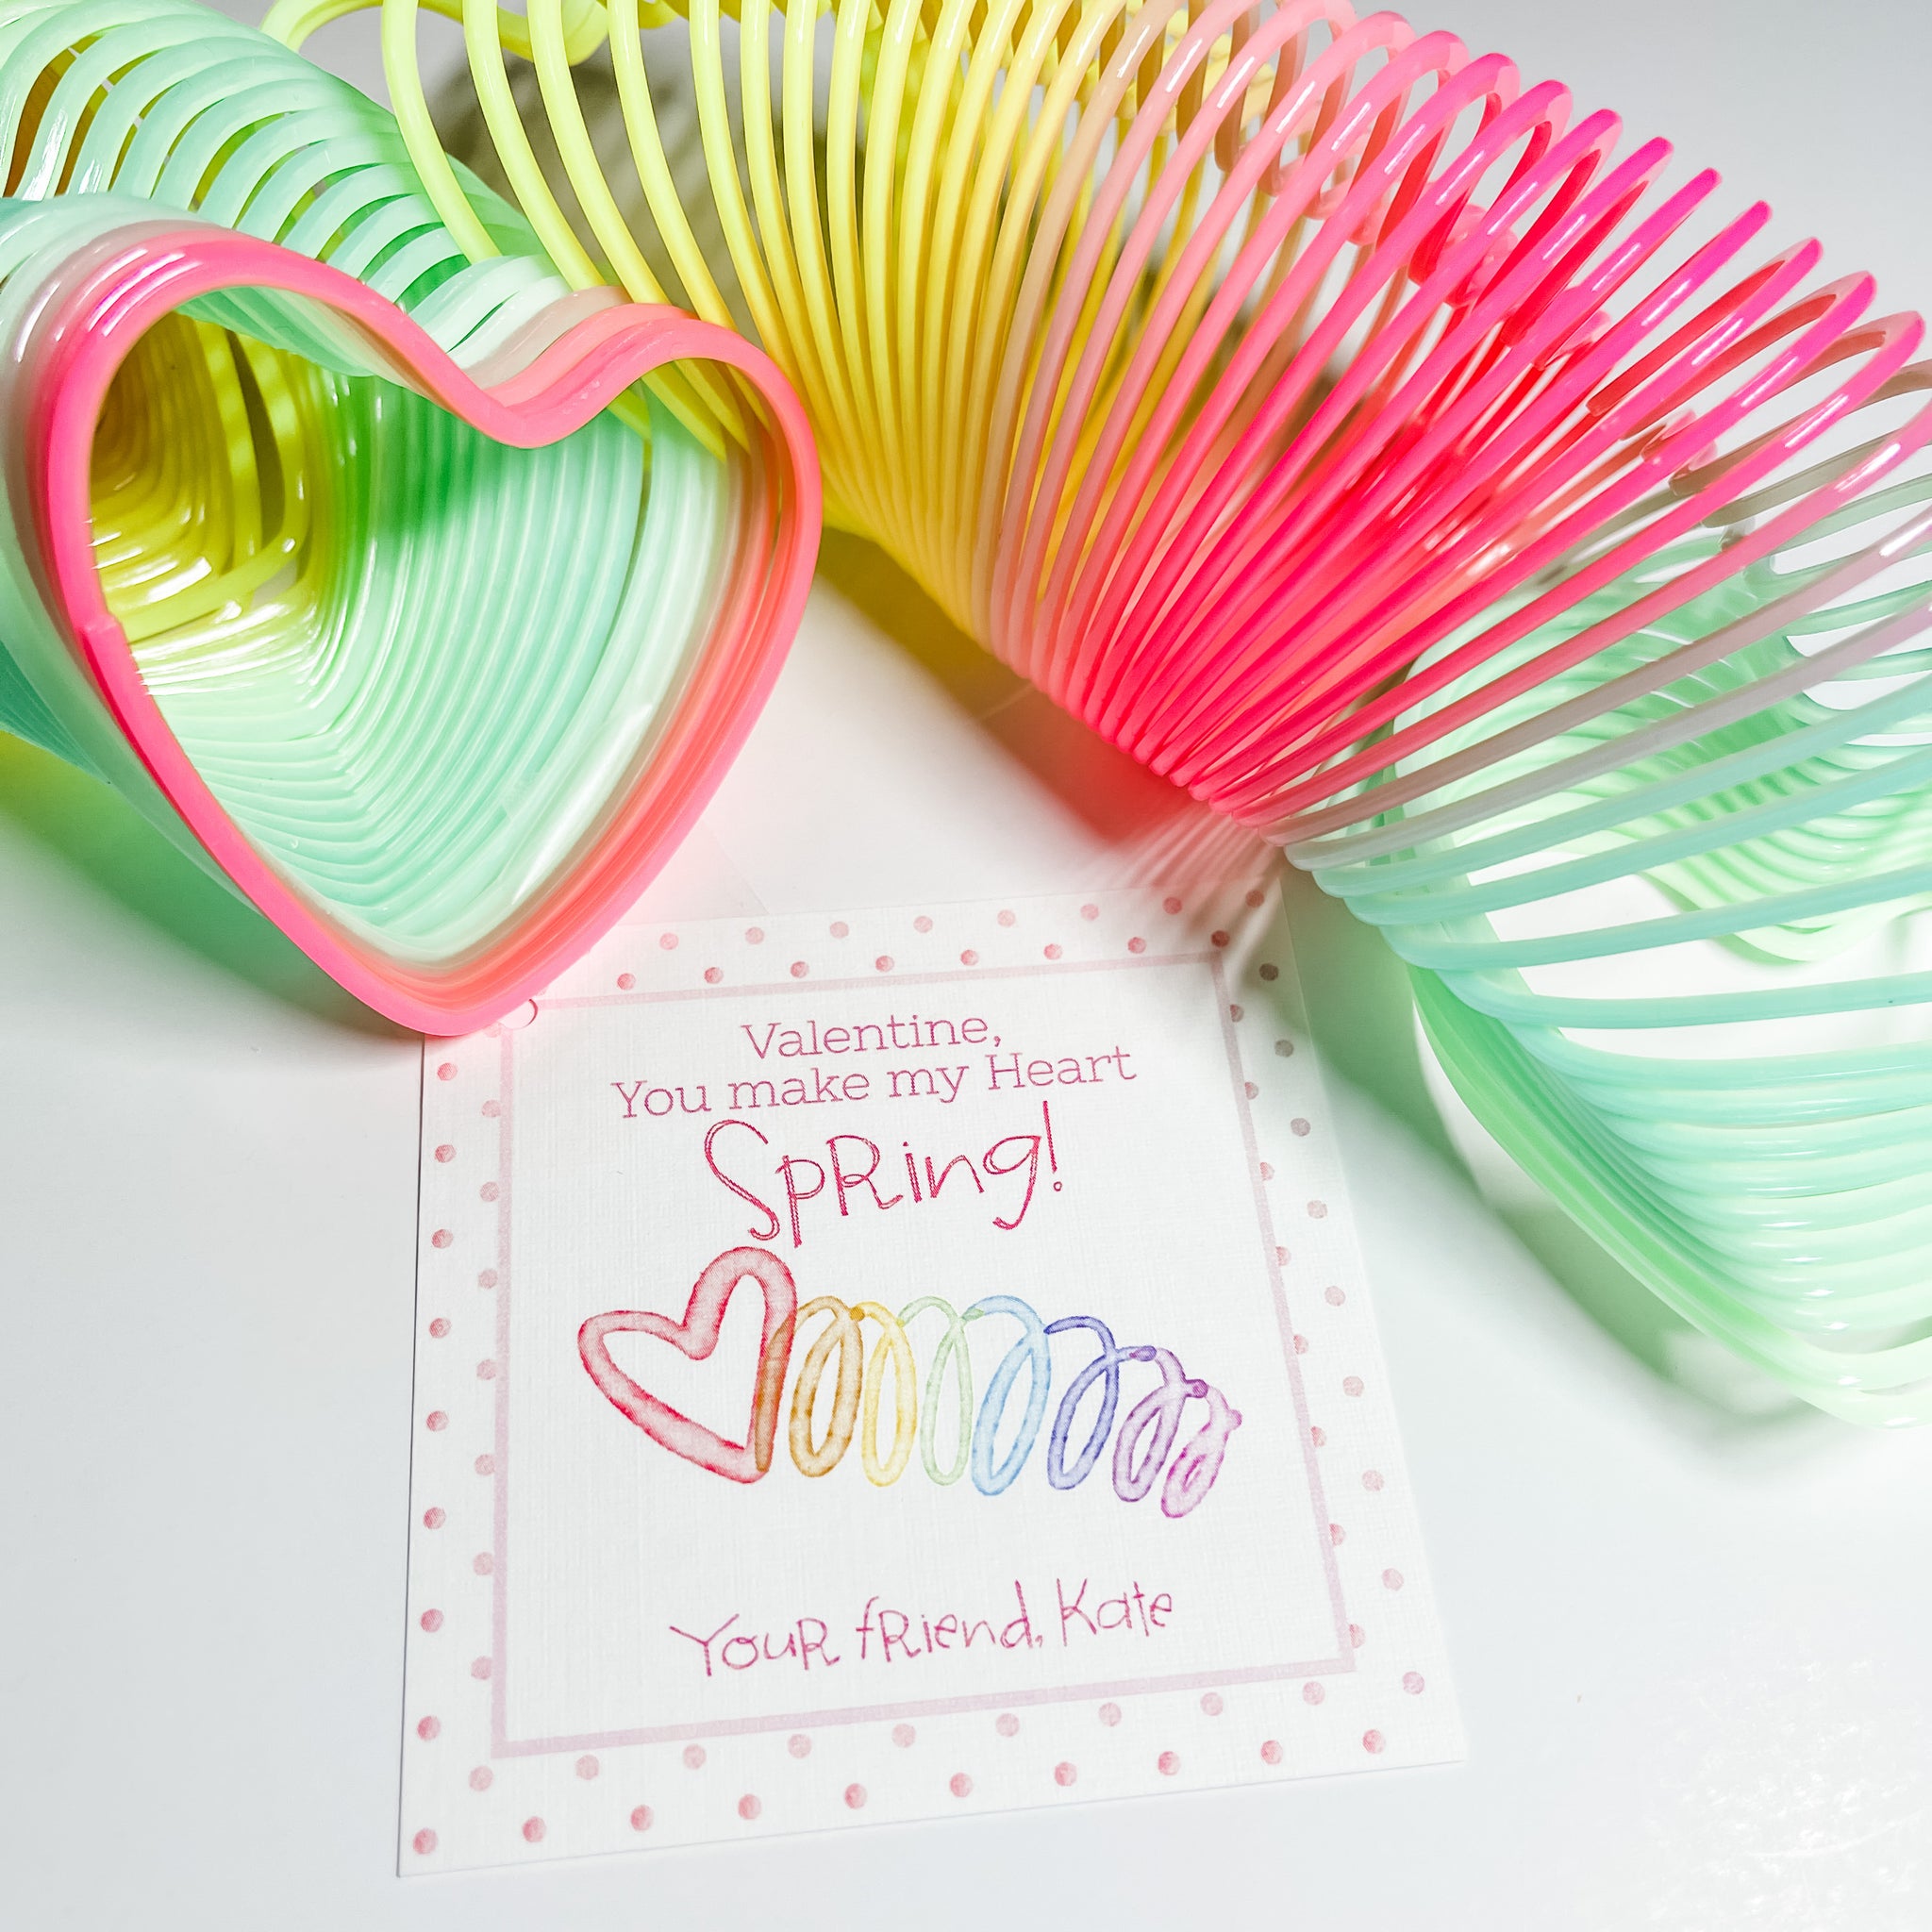 Syncfun 28 Packs Valentines Day Cards with Rainbow Springs Slinky Toys, Fidget Valentines for Kids Class Valentines Games Favors